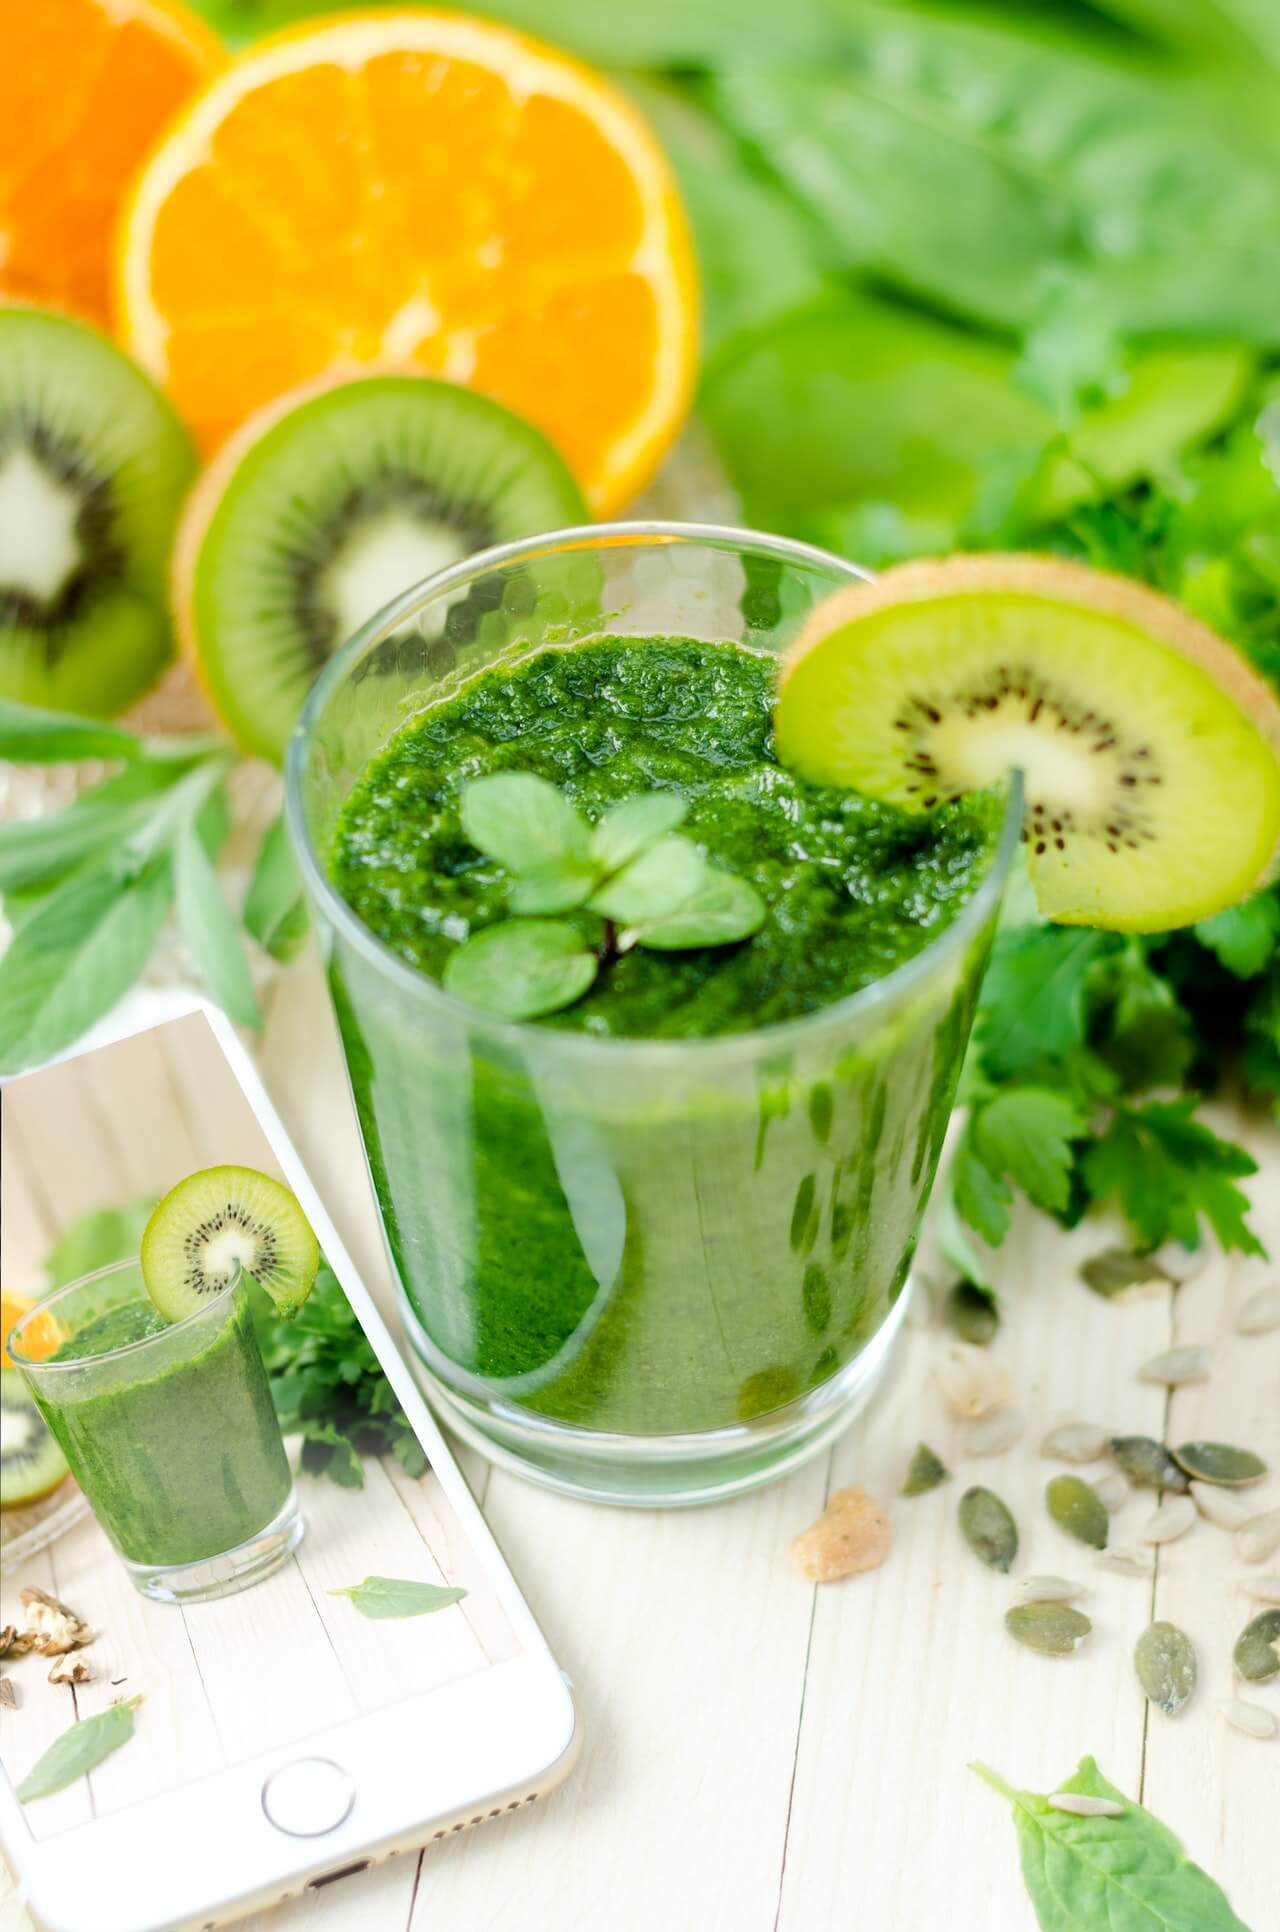 Do you want to lose some weight? Or maybe cleanse your body for spring? Check out these green smoothie recipes!